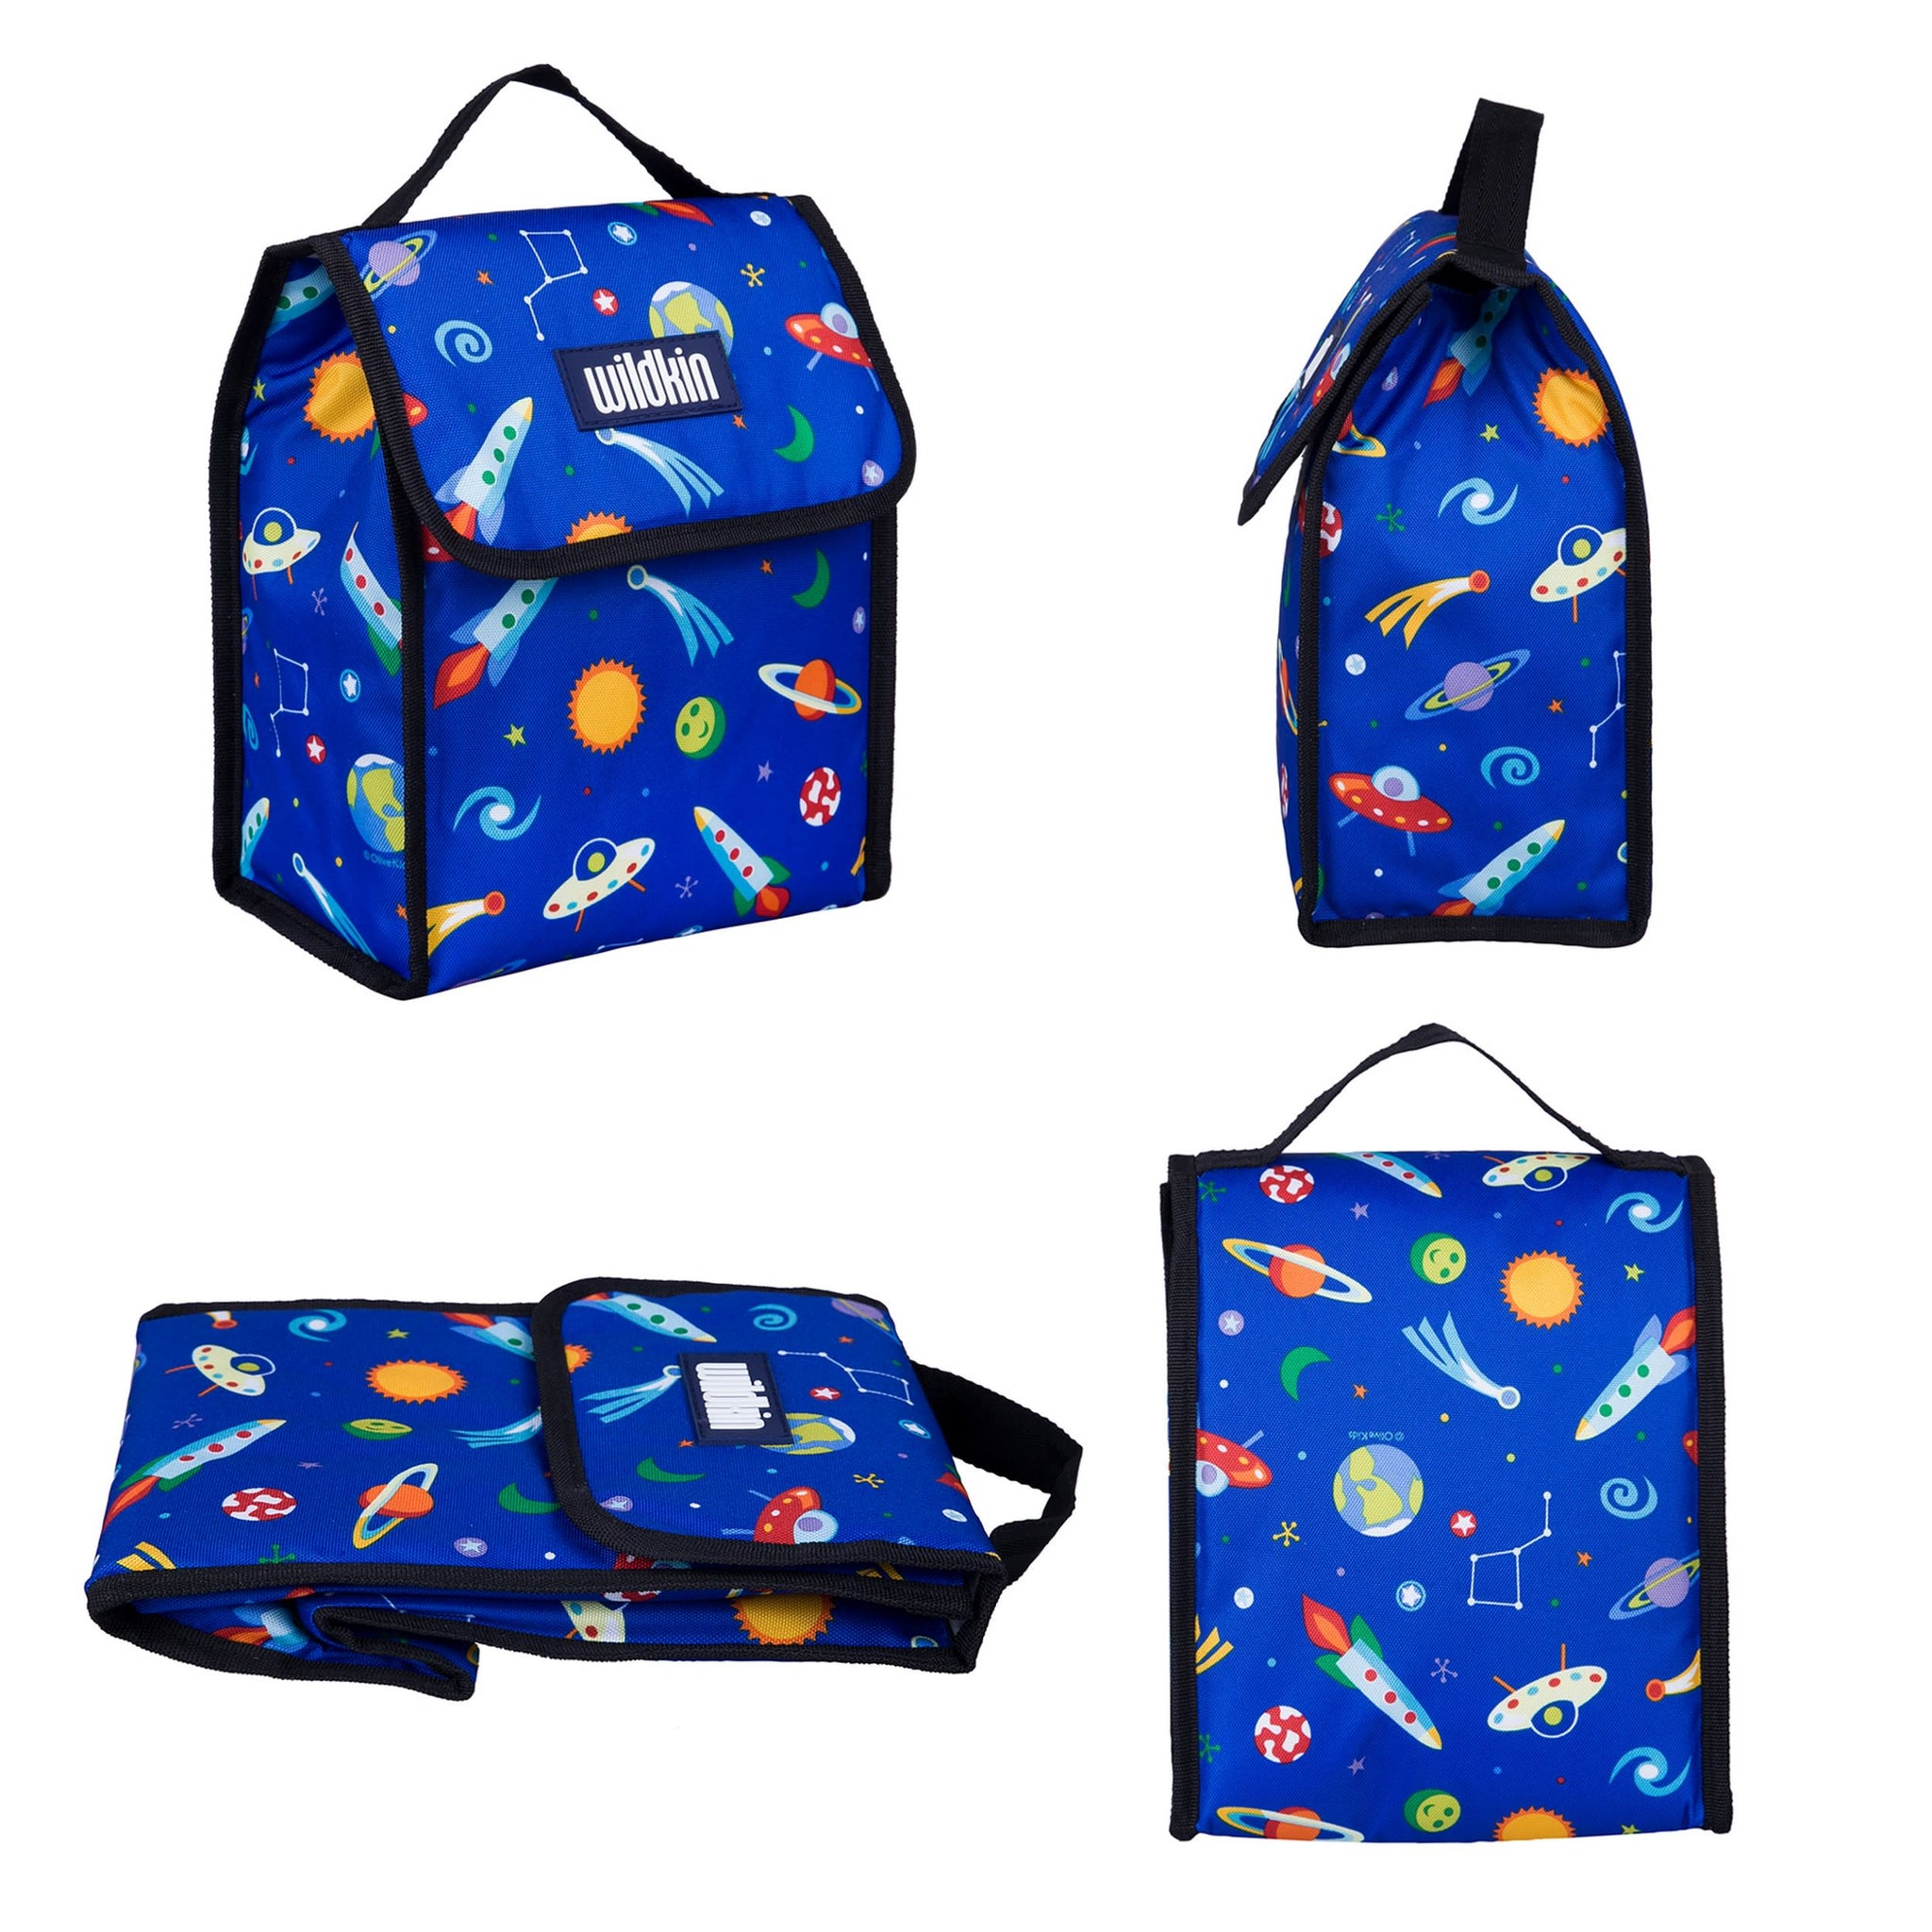 Wildkin Olive Kids Out of This World Lunch Box, Blue